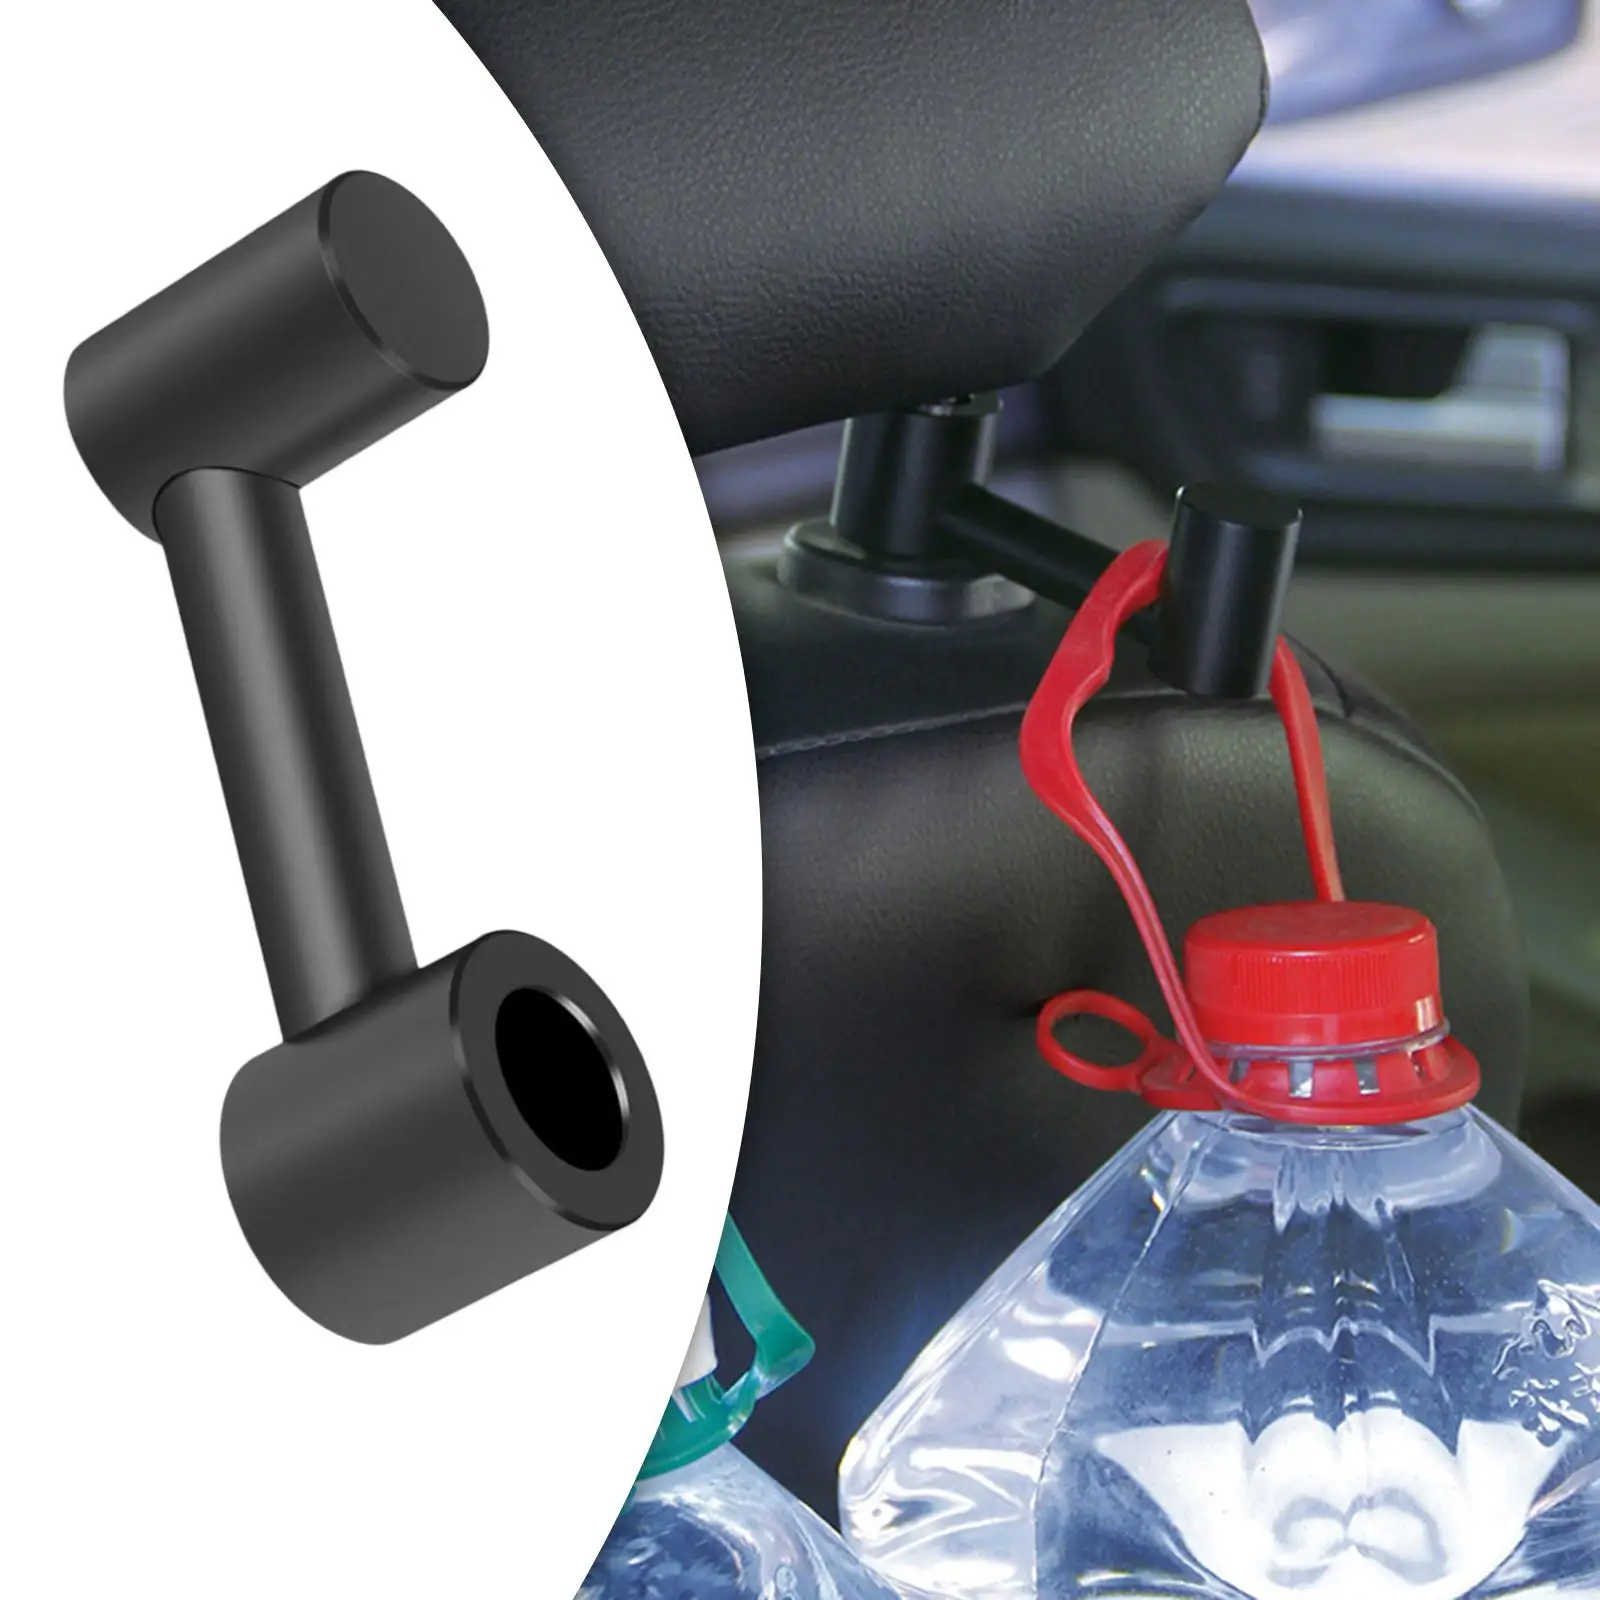  Headrest Hook Aluminum Alloy Stainless Metal Hanger Durable Interior Accessory Fits for Vehicle Driving Holder Purse Bags